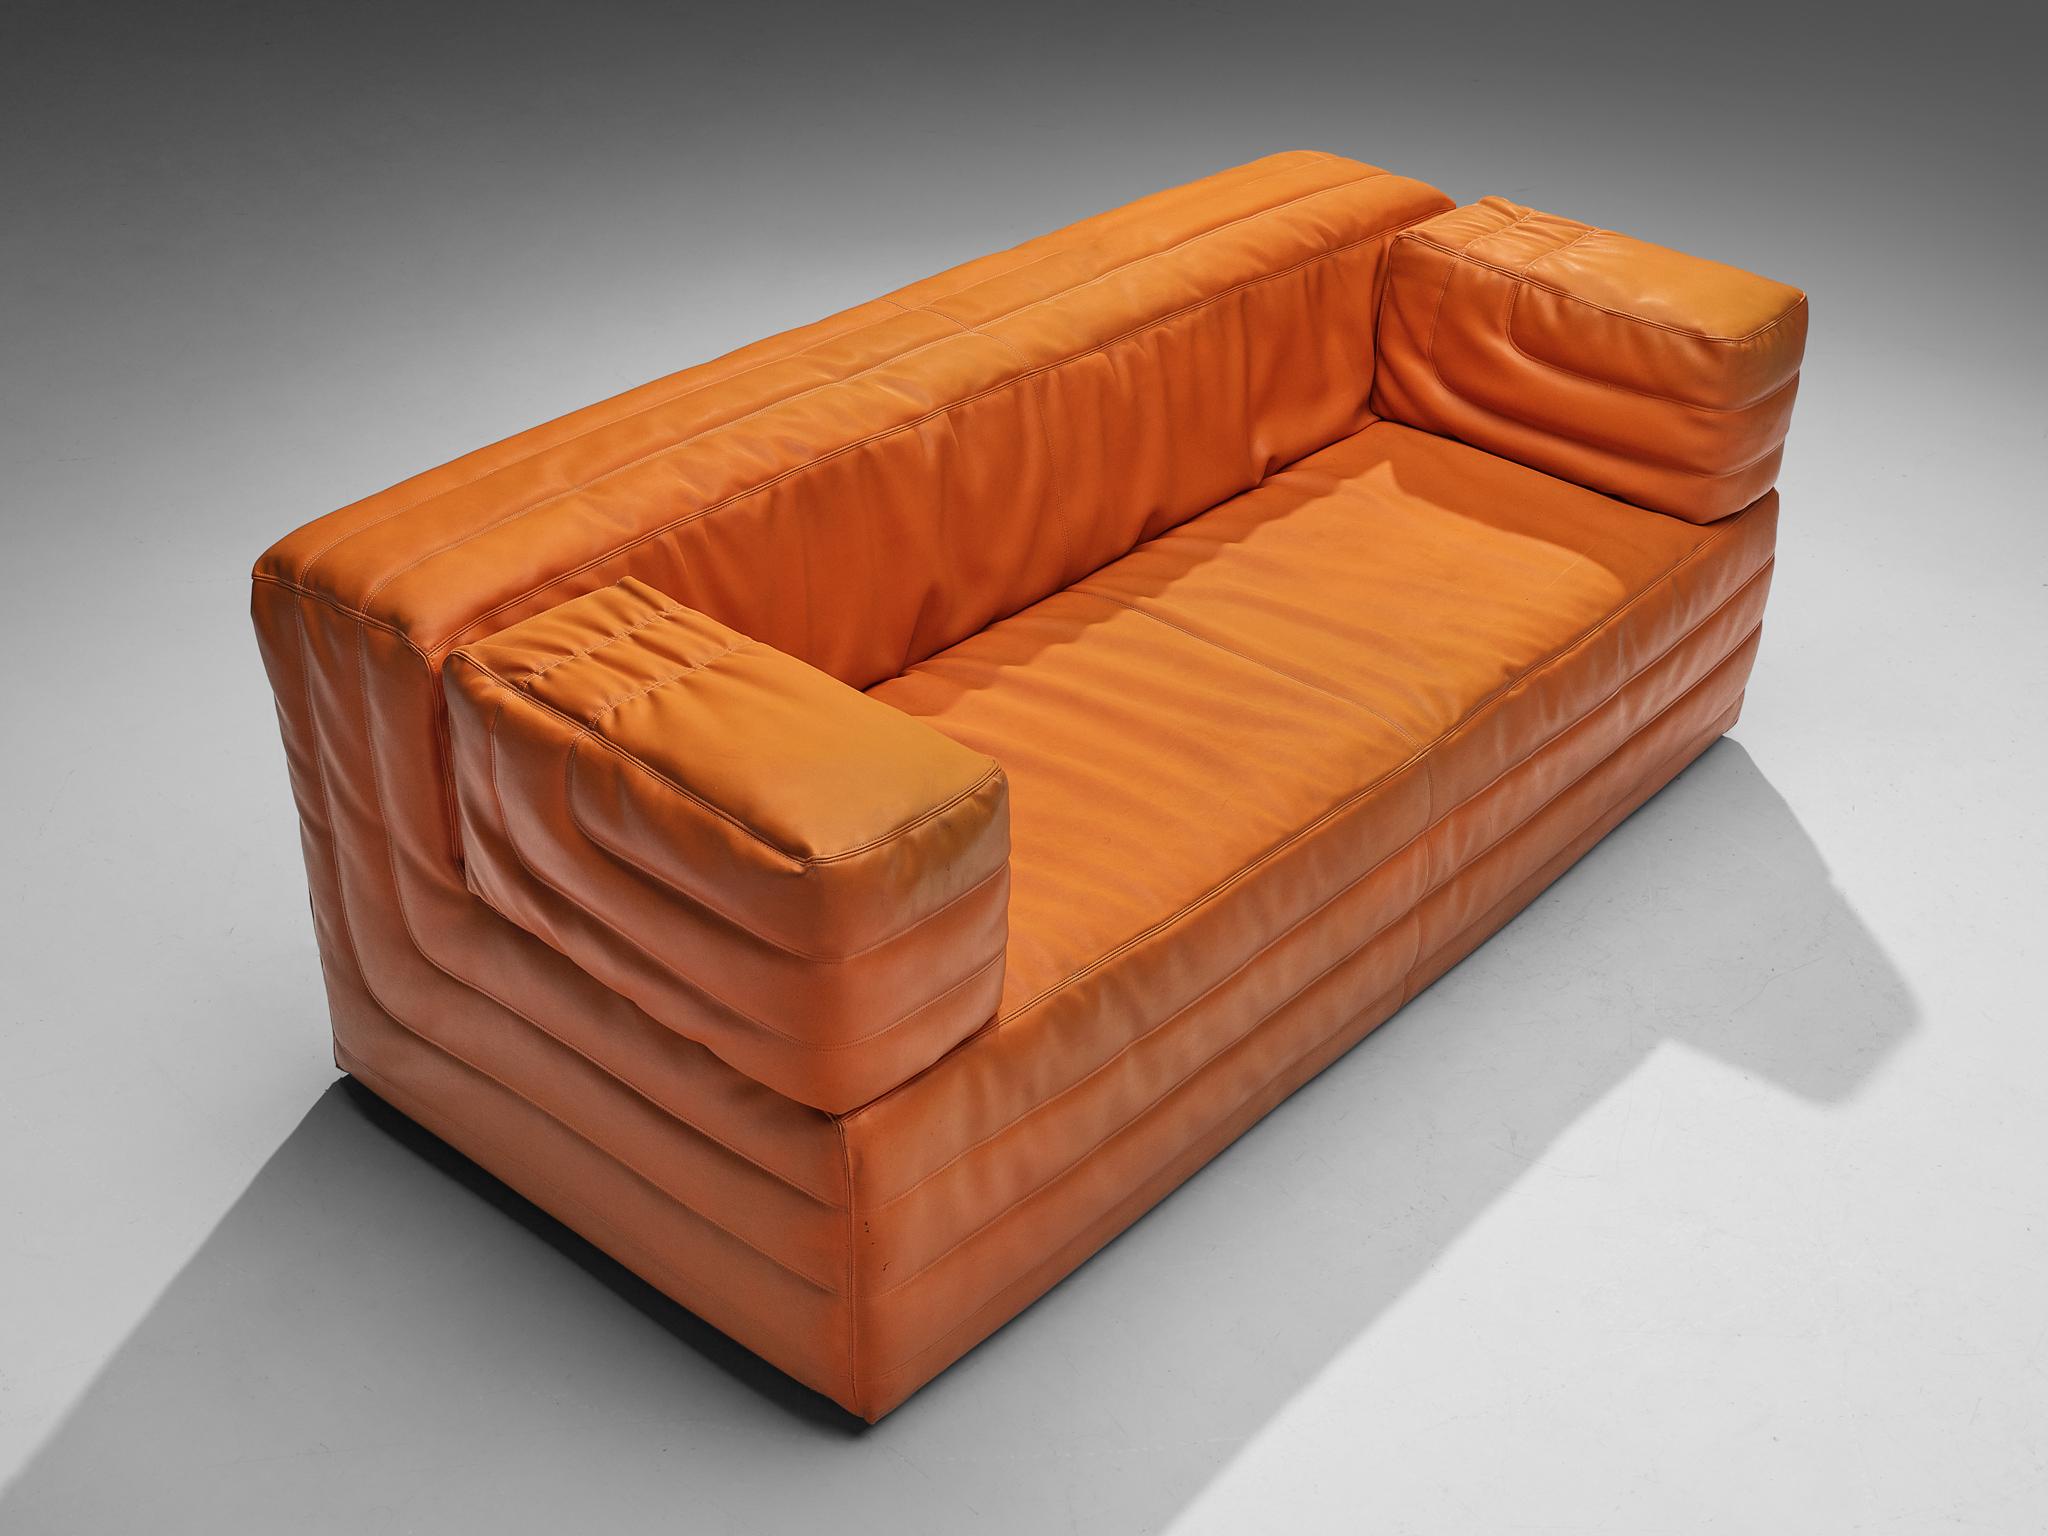 Italian Cubic Two Seat Sofa in Orange Leatherette For Sale at 1stDibs